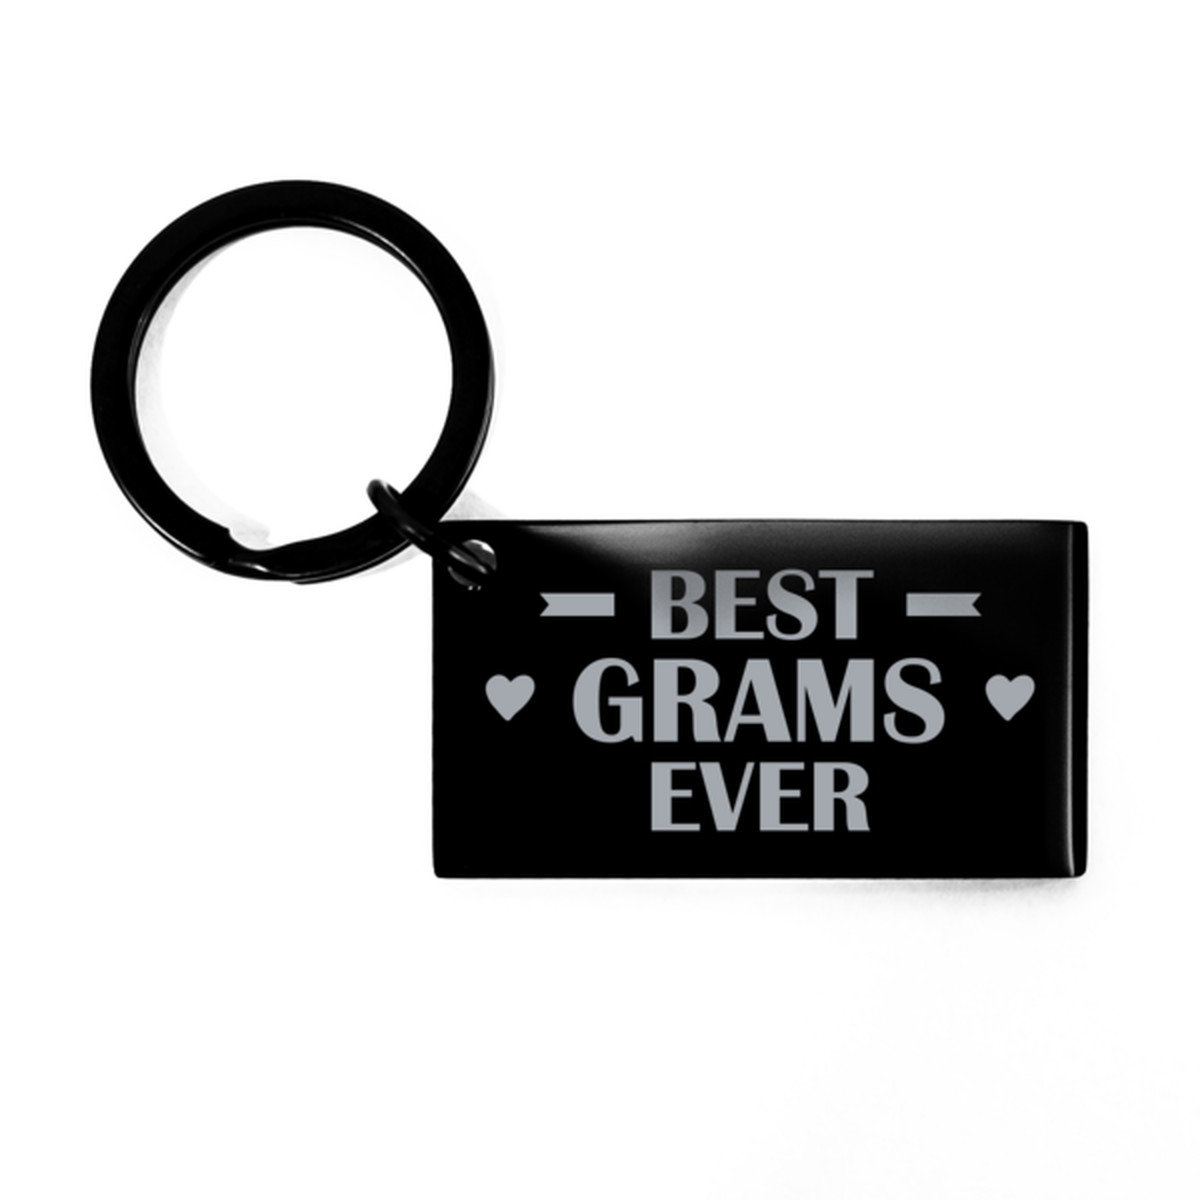 Best Grams Ever Grams Gifts, Funny Black Keychain For Grams, Birthday Engraved Keyring Presents For Women